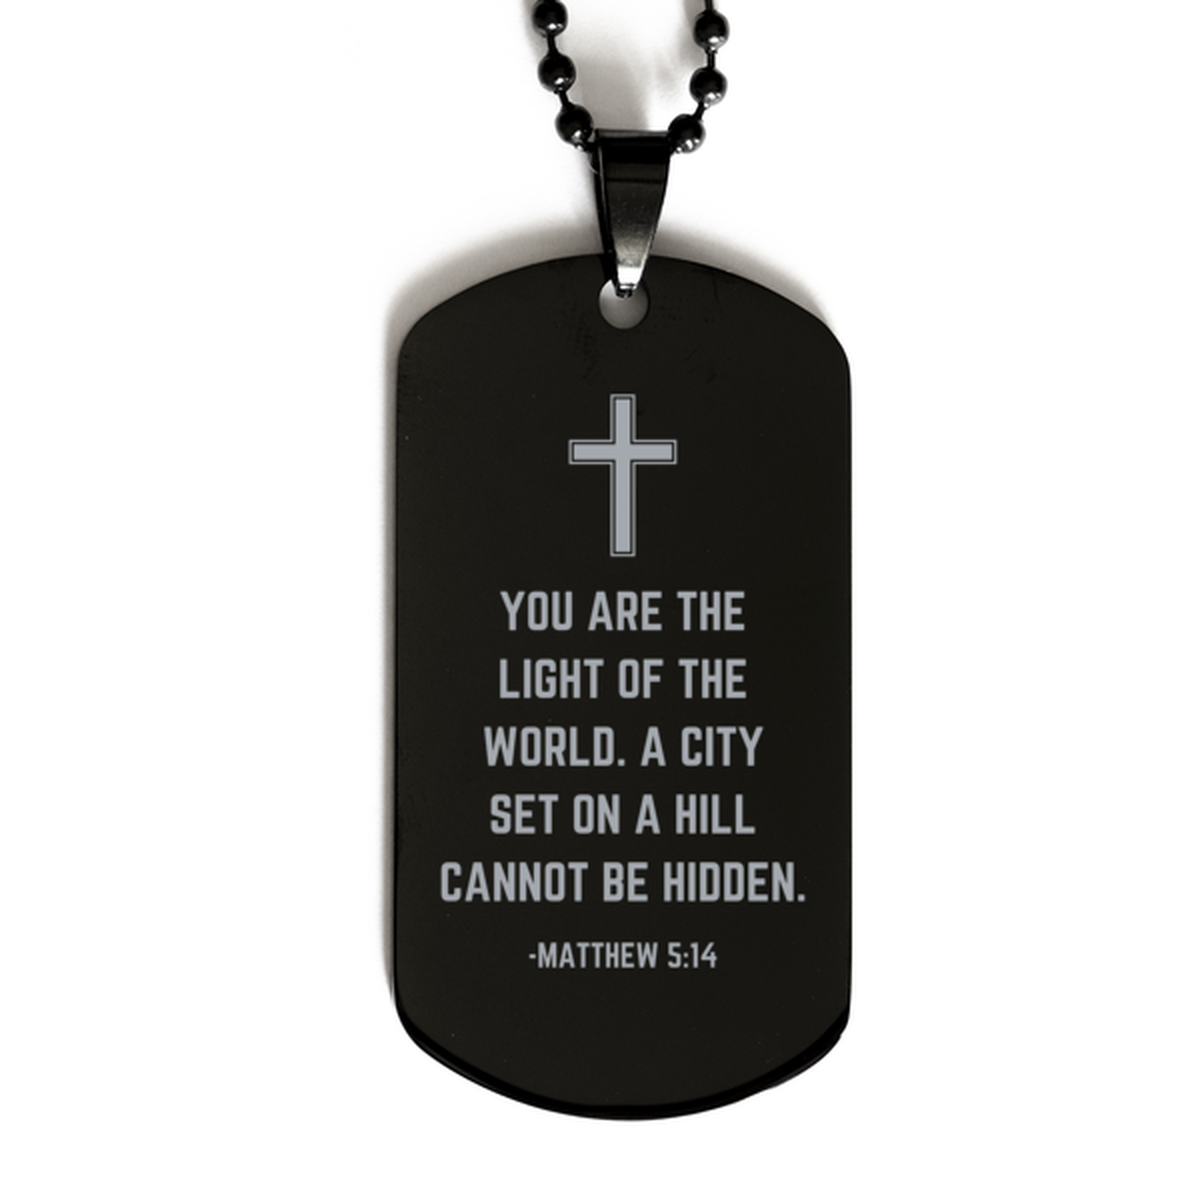 Baptism Gifts For Teenage Boys Girls, Christian Bible Verse Black Dog Tag, You are the light of the world, Confirmation Gifts, Bible Verse Necklace for Son, Godson, Grandson, Nephew